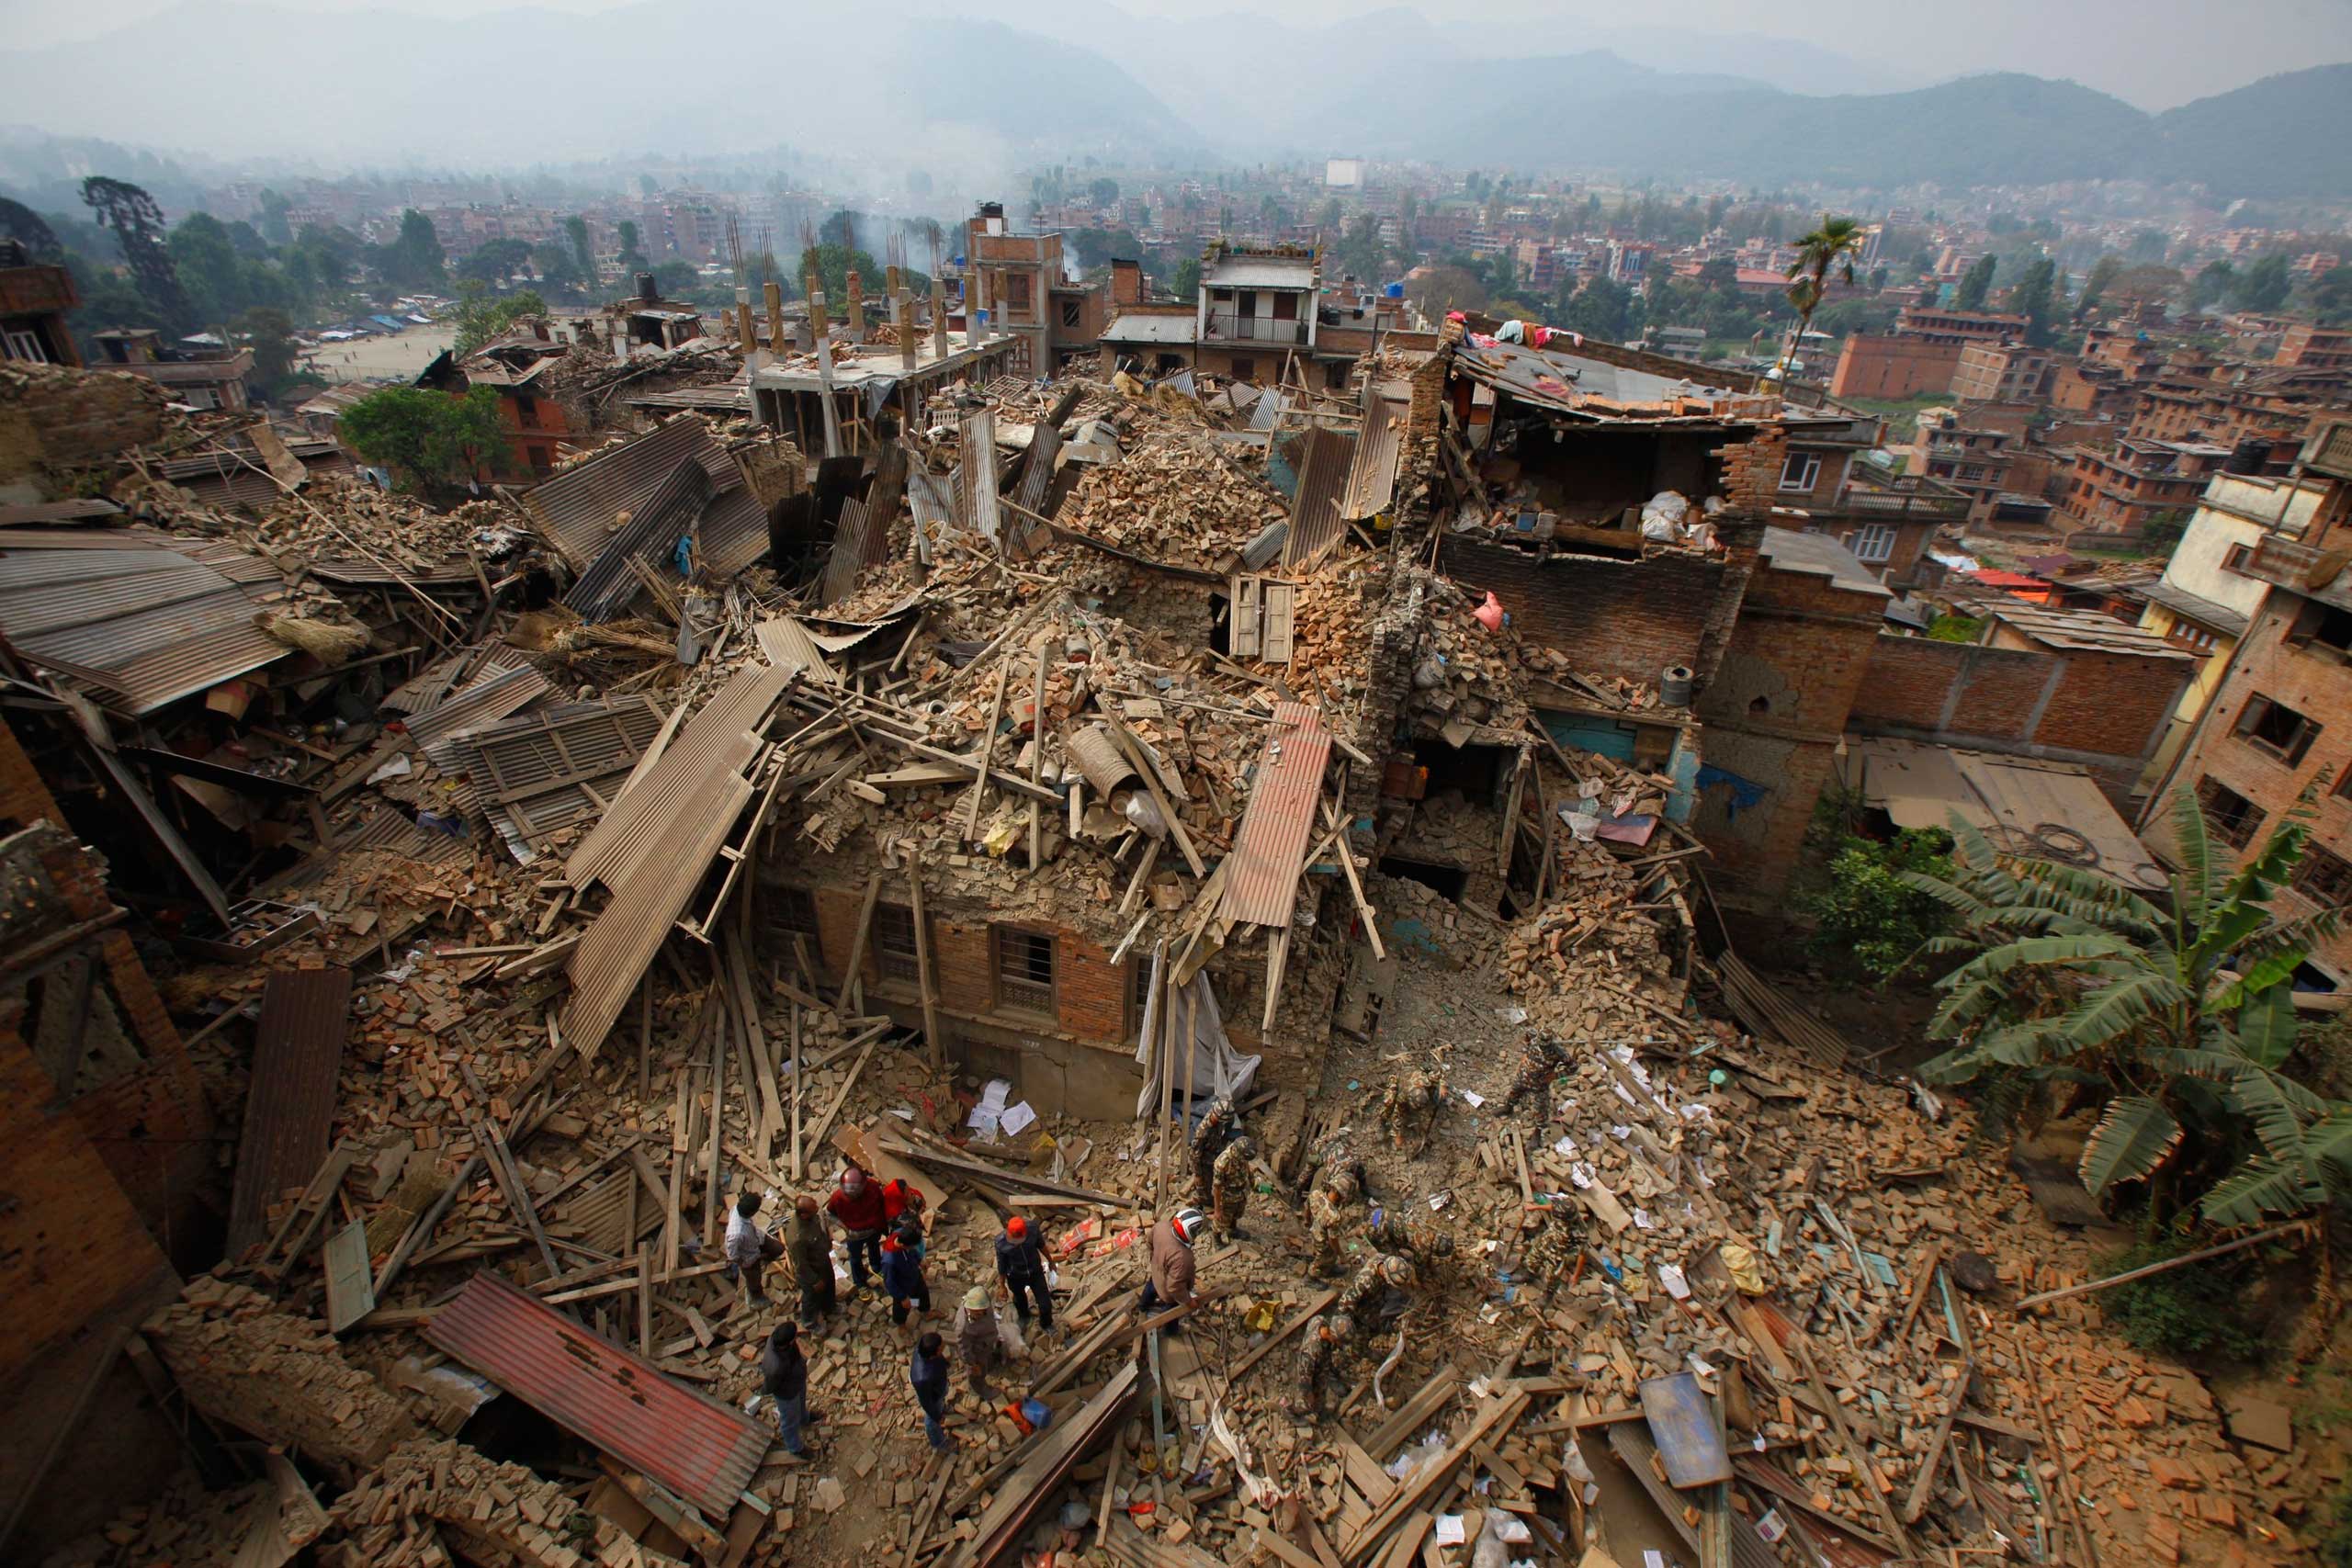 Rescue workers remove debris as they search for victims of earthquake in Bhaktapur near Kathmandu on April 26, 2015.